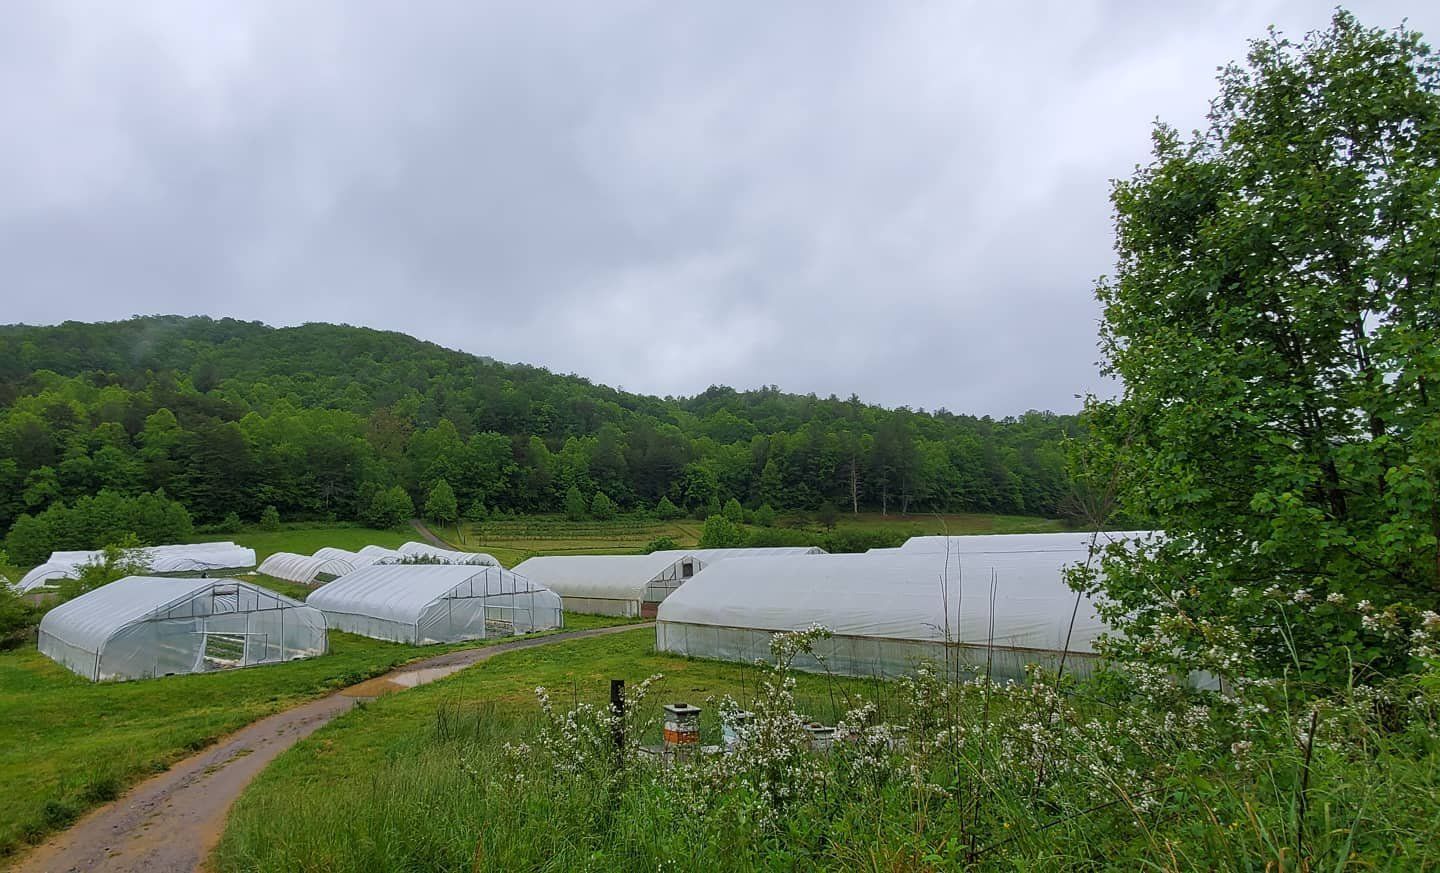 Farm Happenings for May 26, 2020: lackadaisical worry